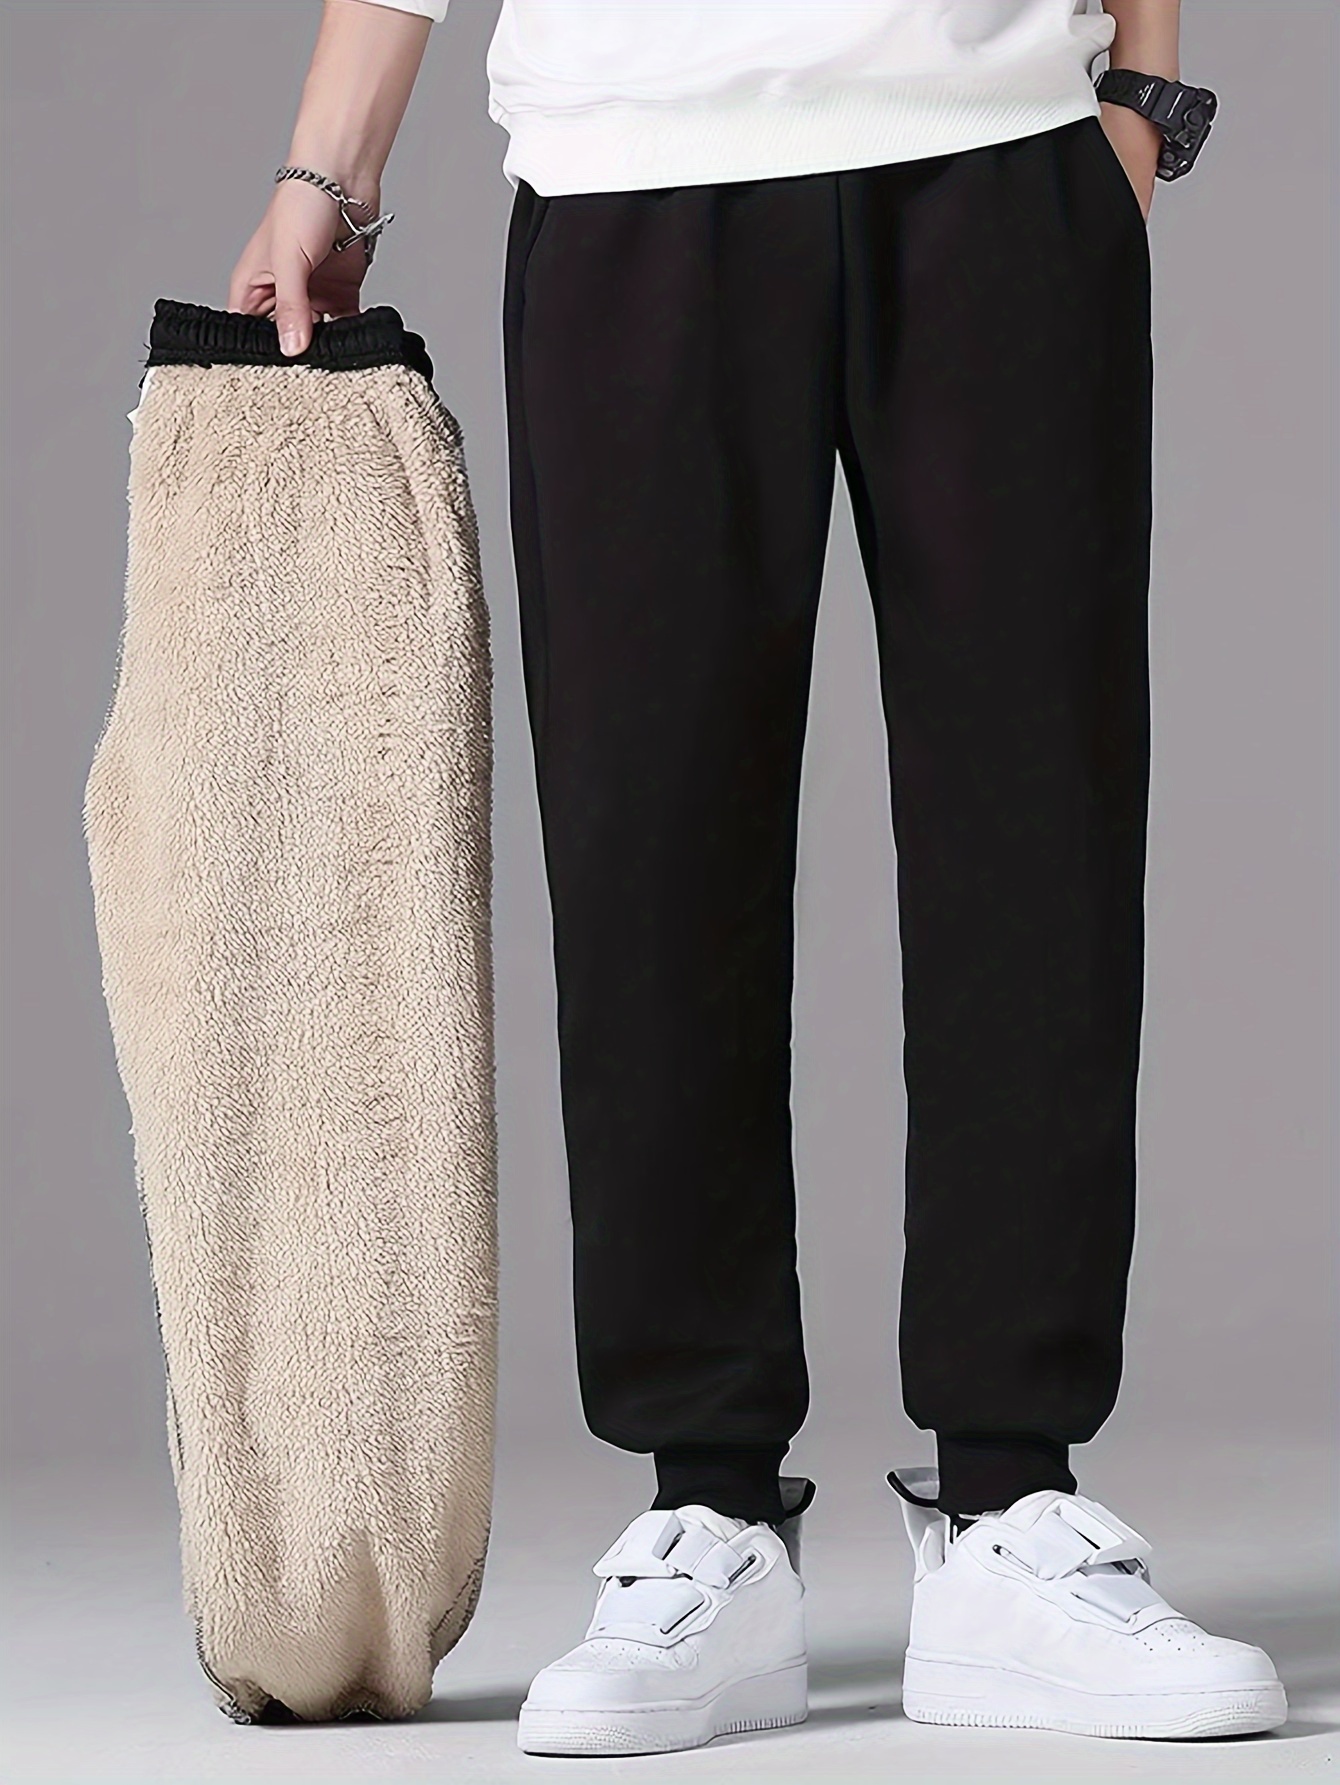 Men's Casual Polar Fleece Joggers, Warm Thick Sports Pants For Fall Winter